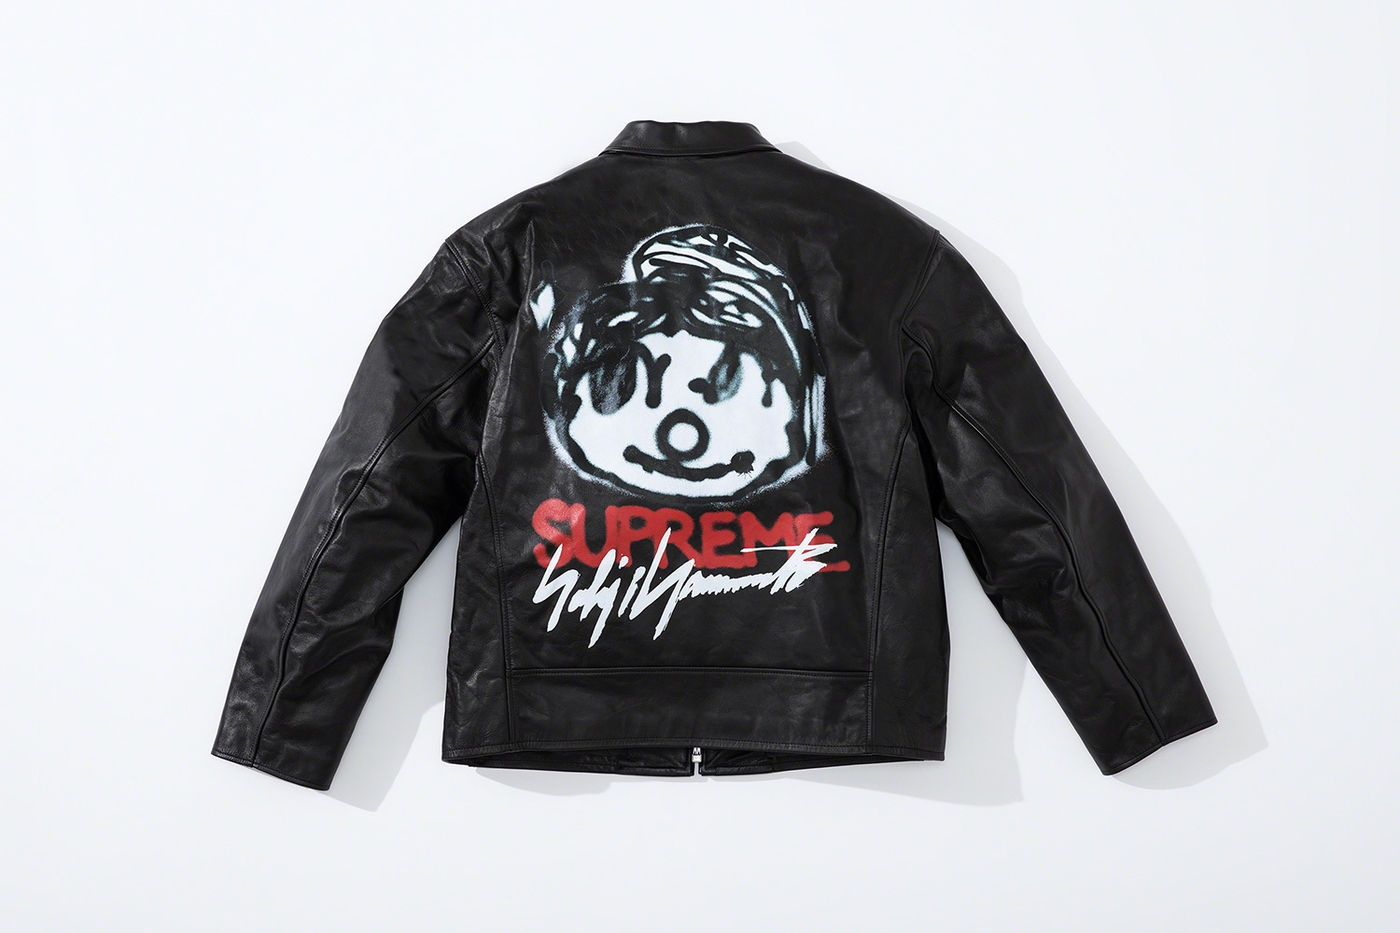 Leather Work Jacket. Original artwork by Chito. (20/58)